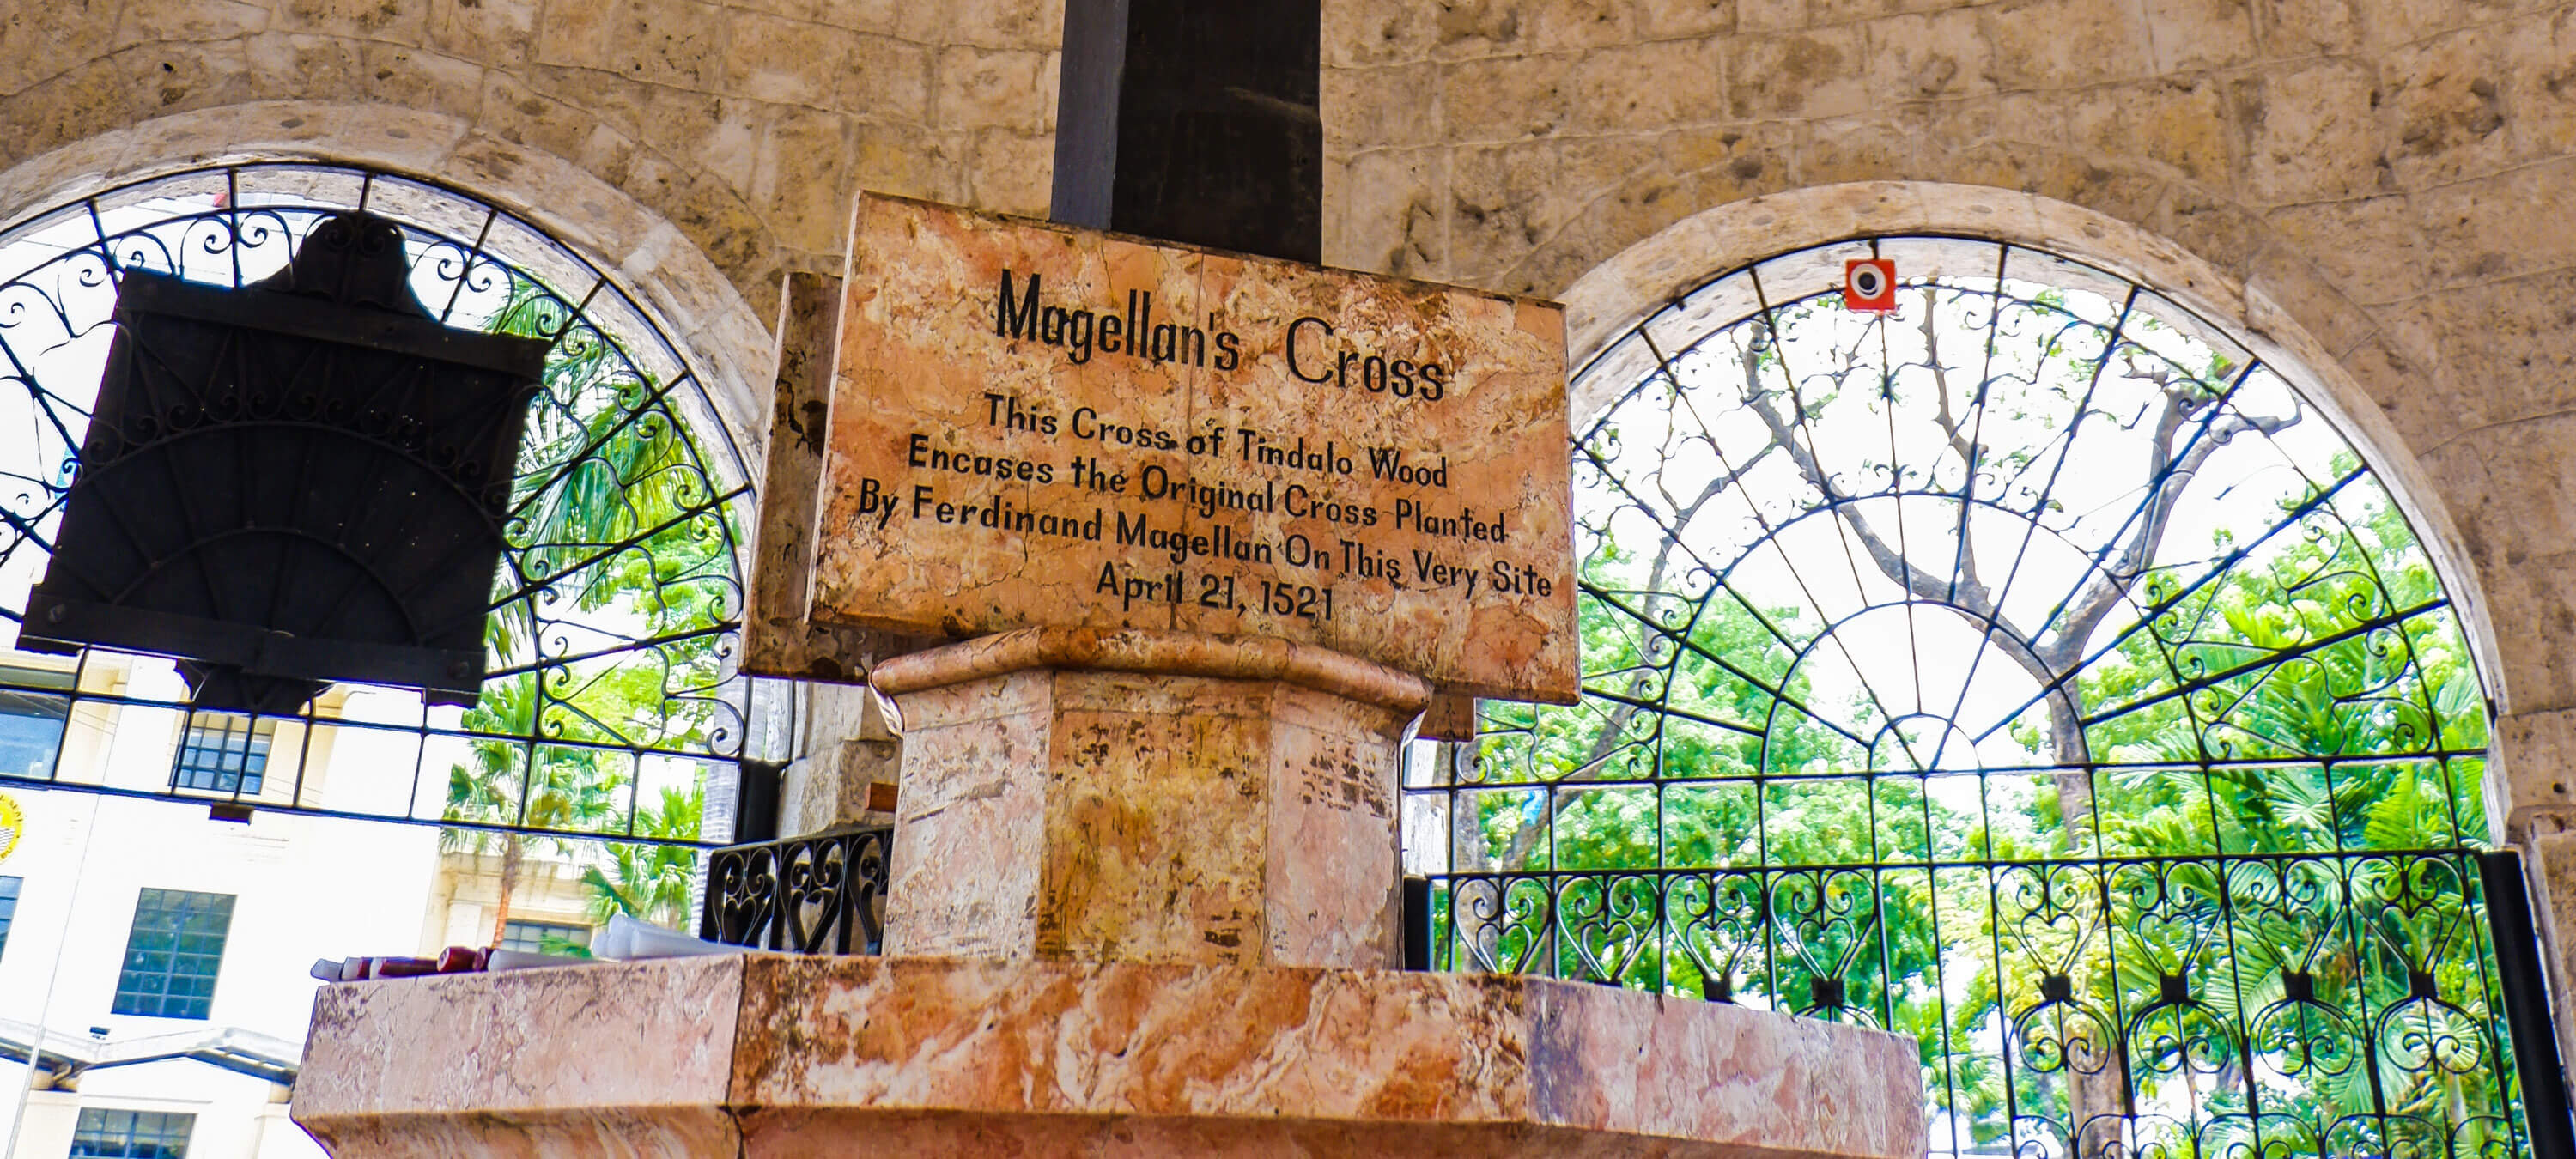 IS THIS ACCURATE? Thousands of tourists visiting Magellan’s Cross daily think, because of this panel, that part of the cross is still there and that it was planted at this very spot. Those claims don’t have historical support.